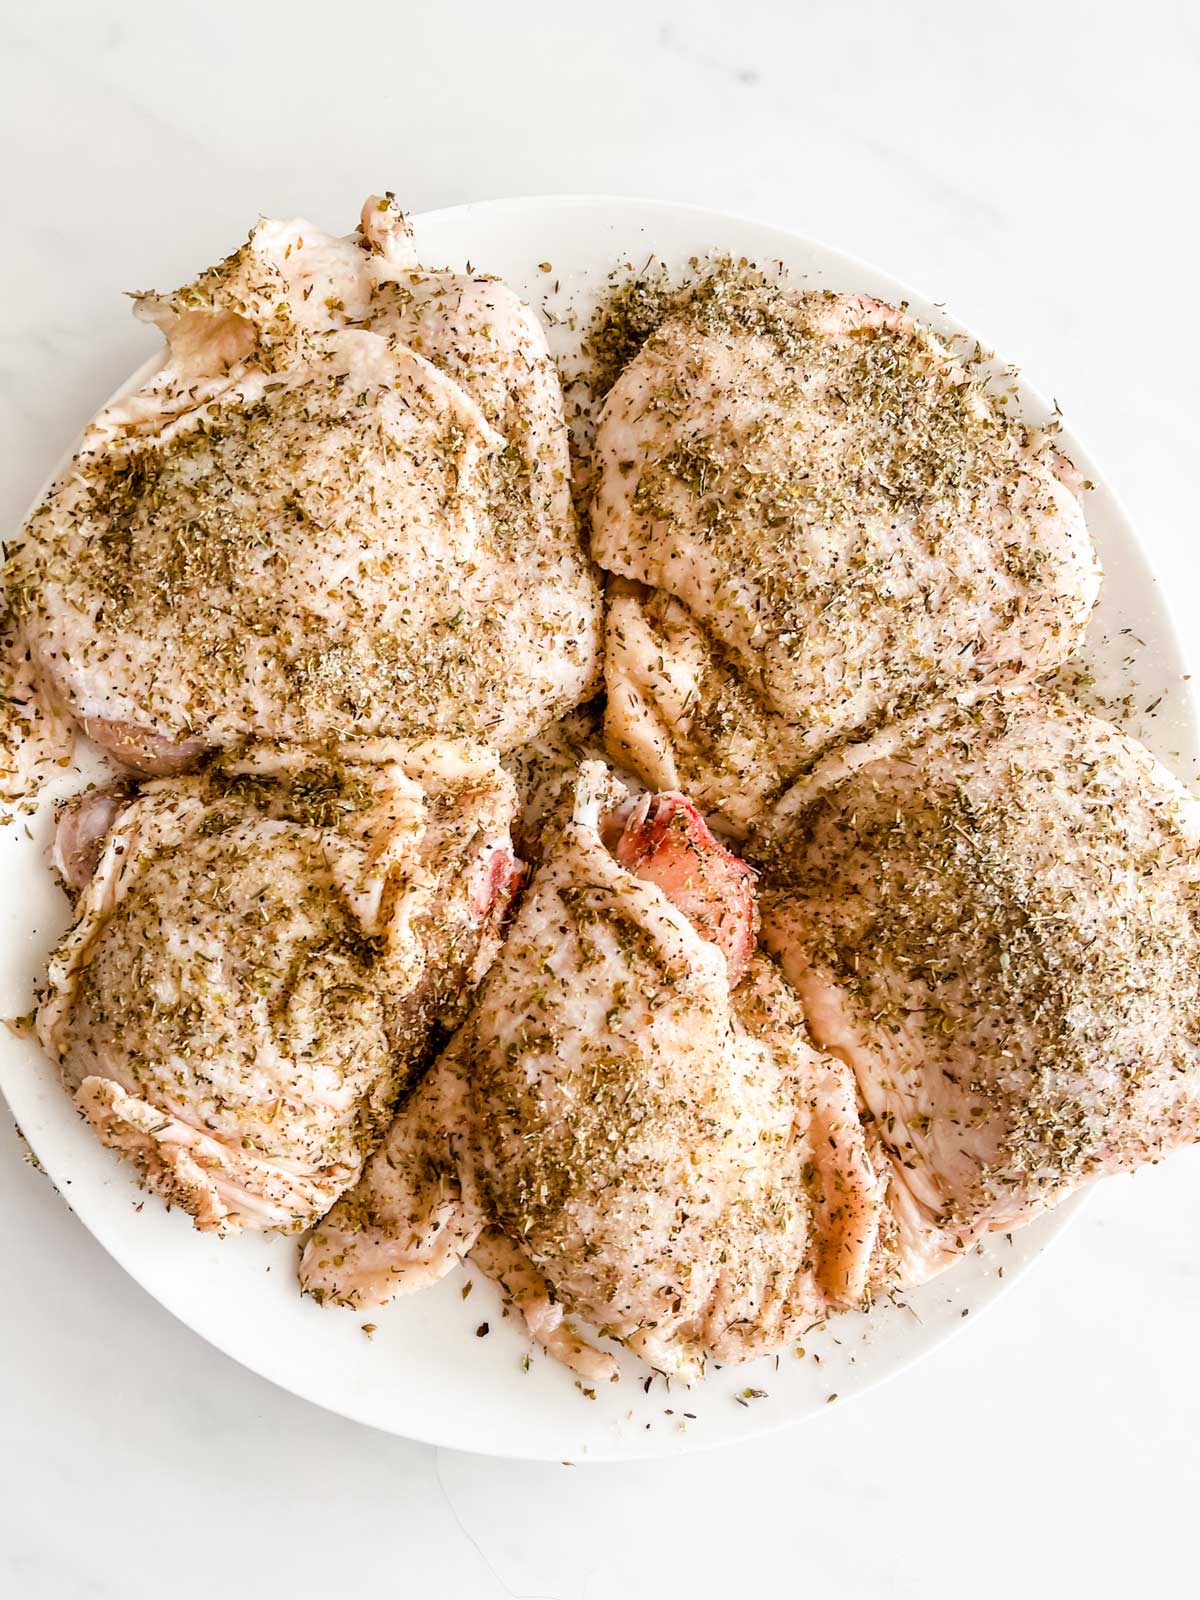 Photo of a plate of seasoned chicken thighs.